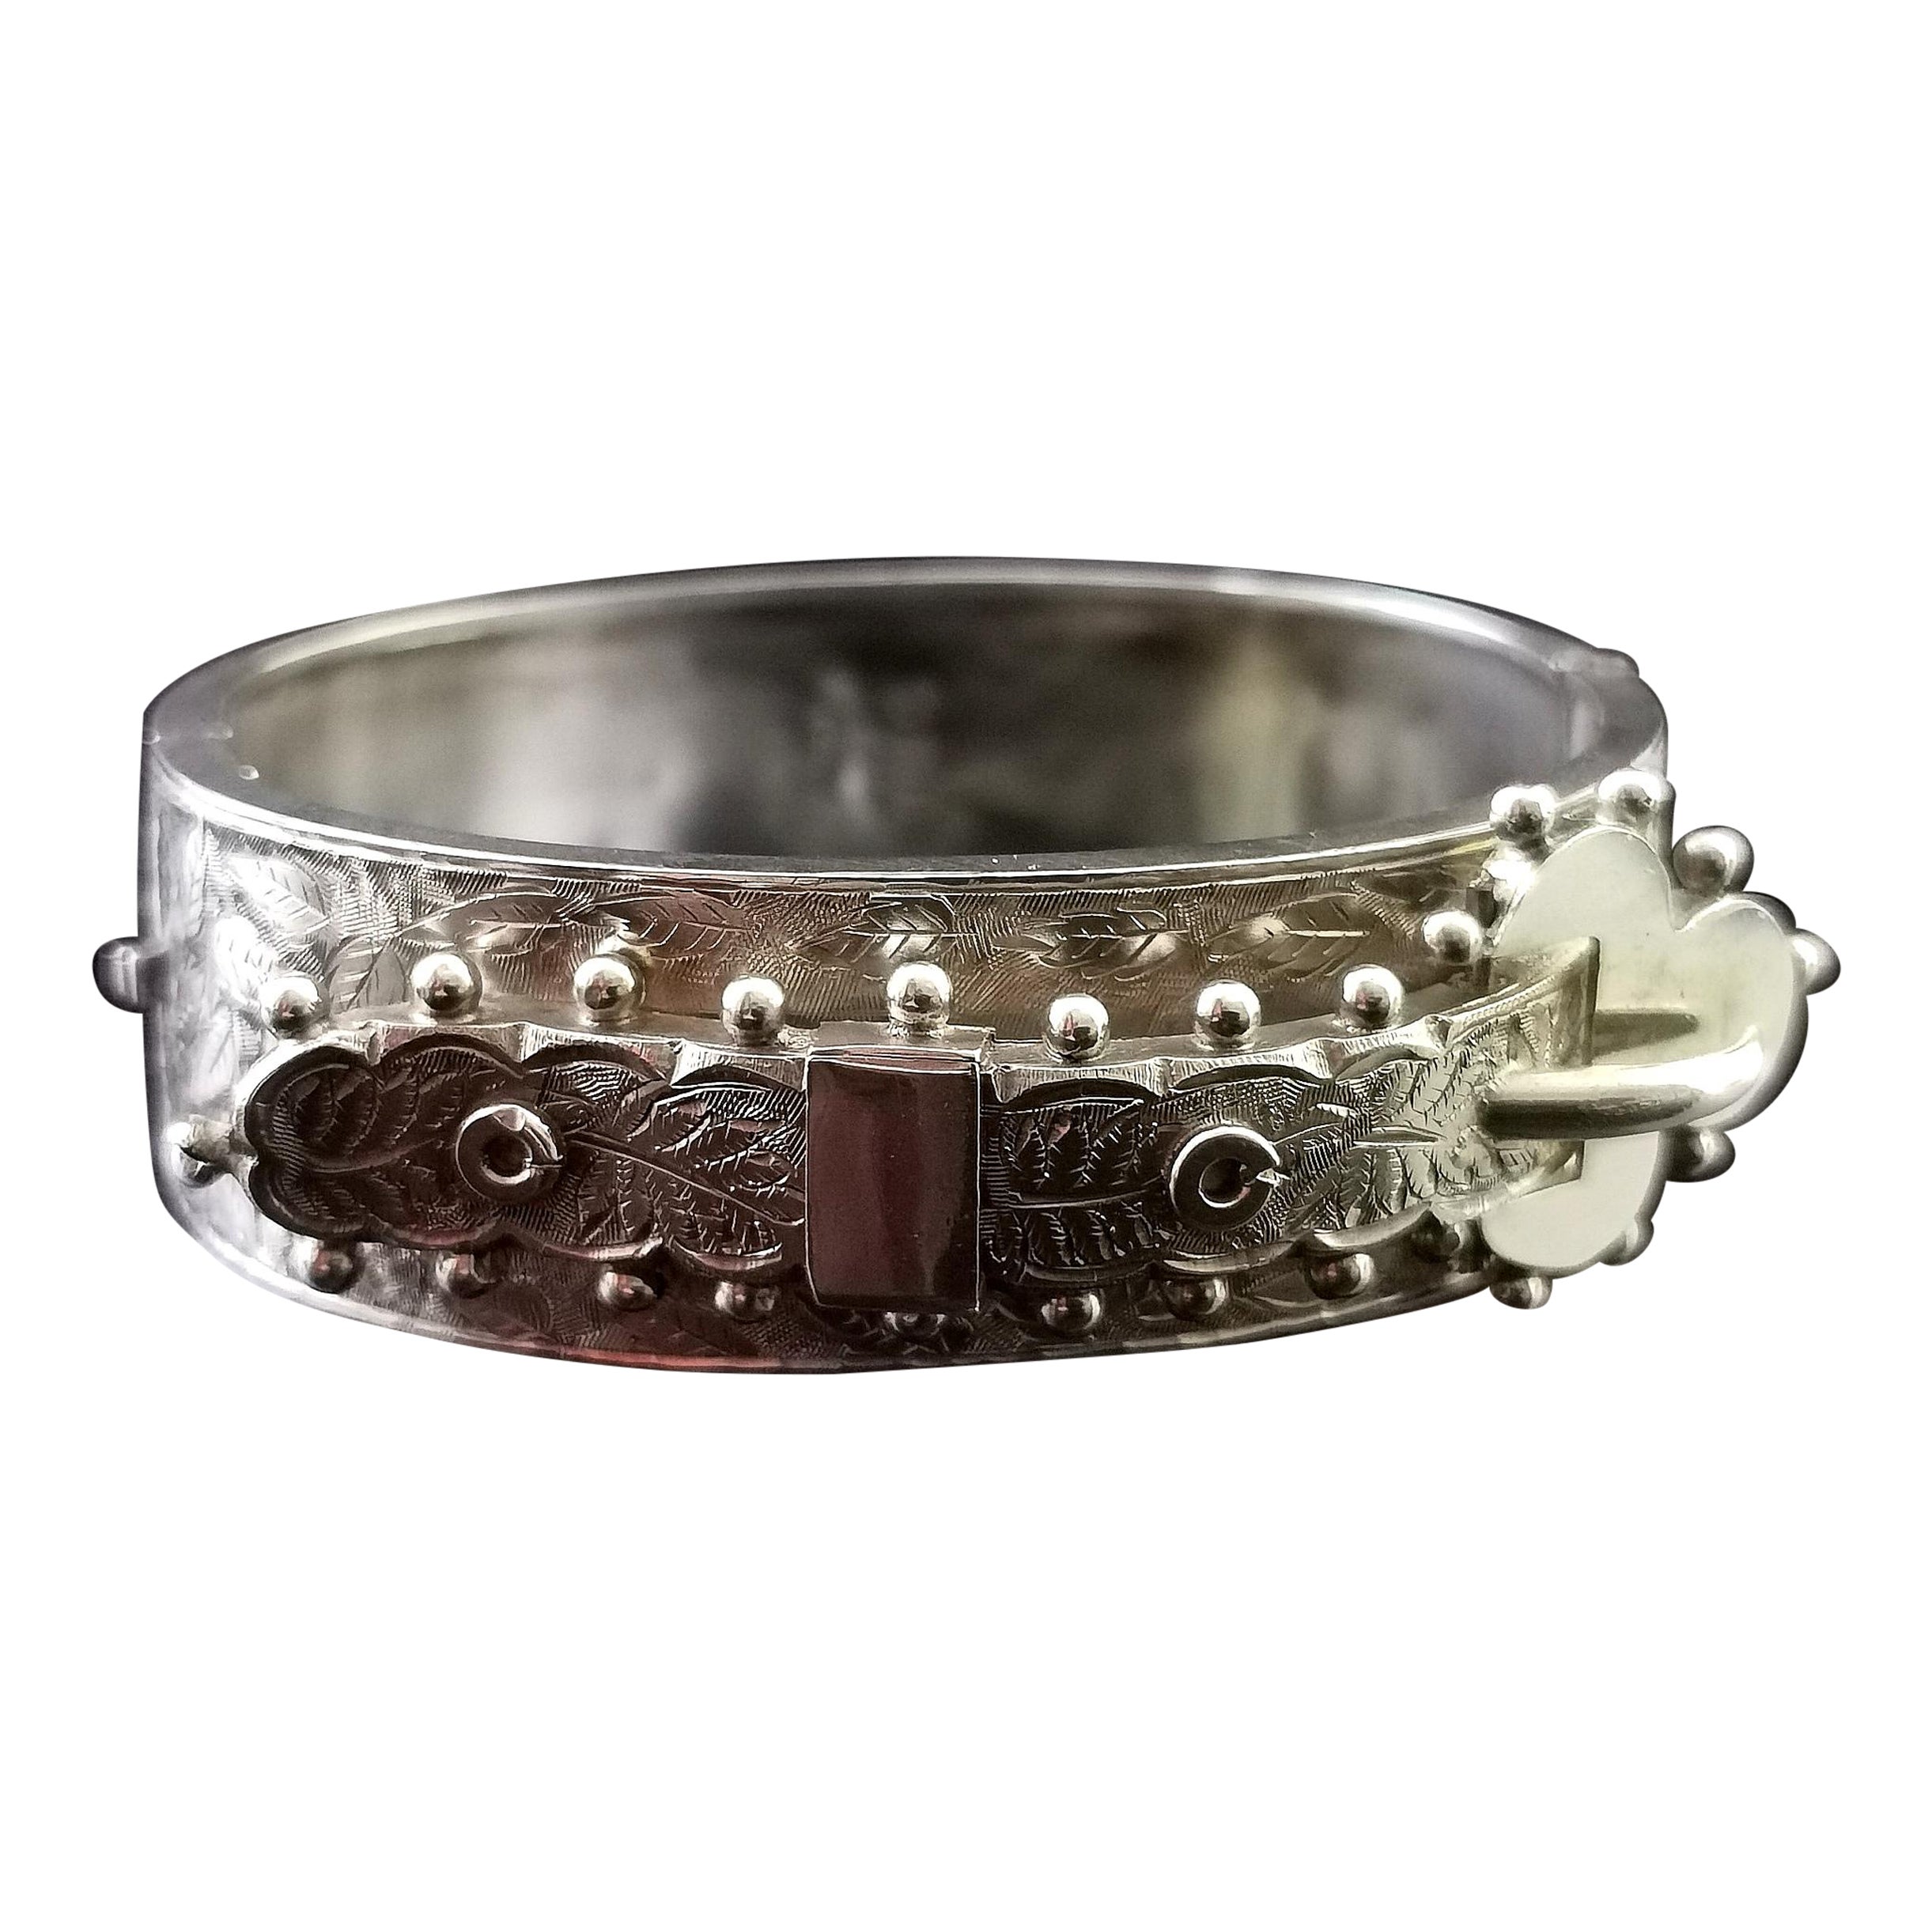 Antique Victorian Silver Buckle Bangle, Aesthetic Engraved